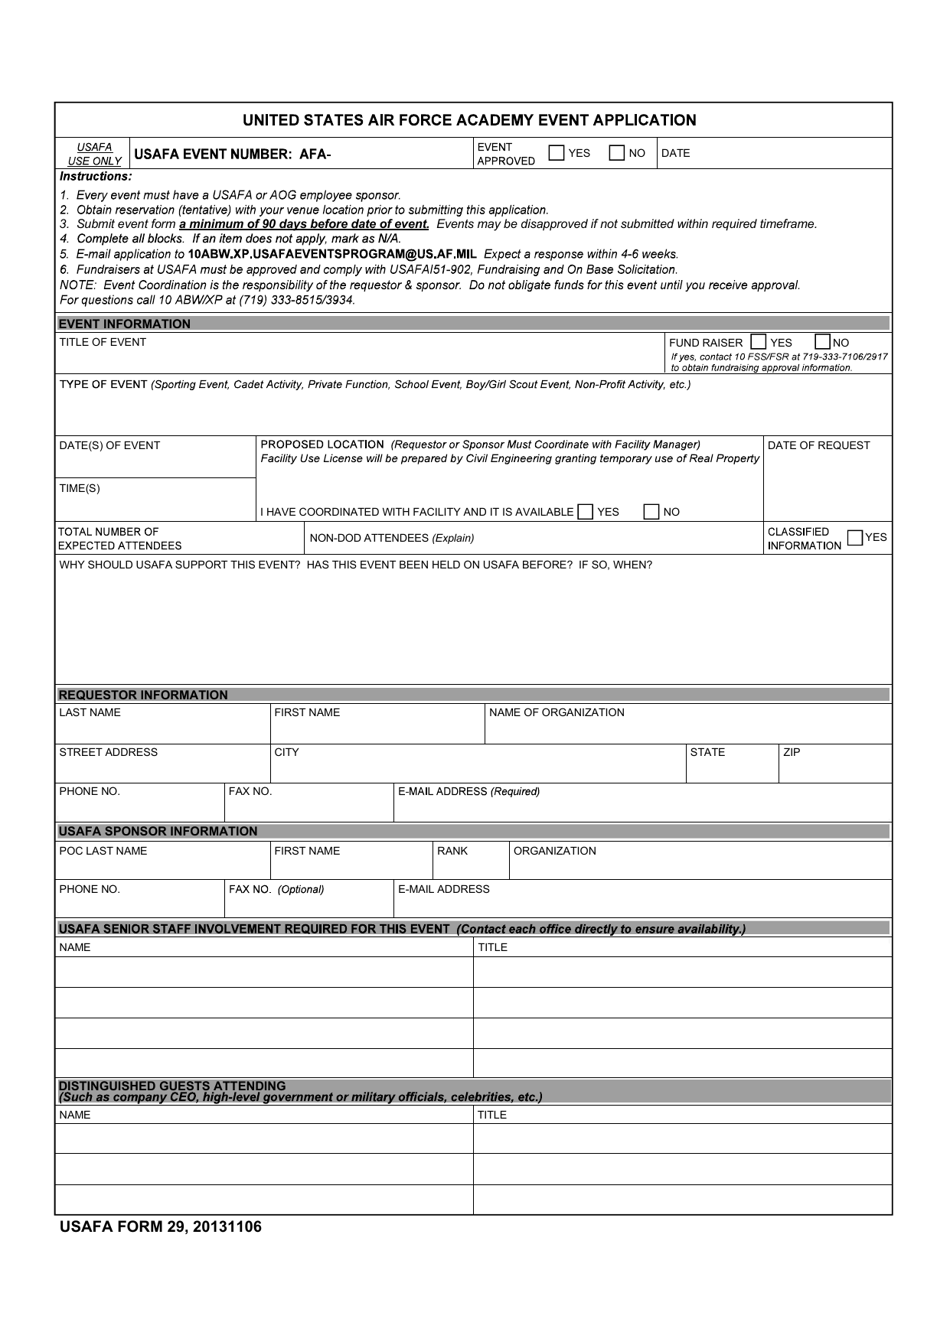 USAFA Form 29 United States Air Force Academy Event Application, Page 1